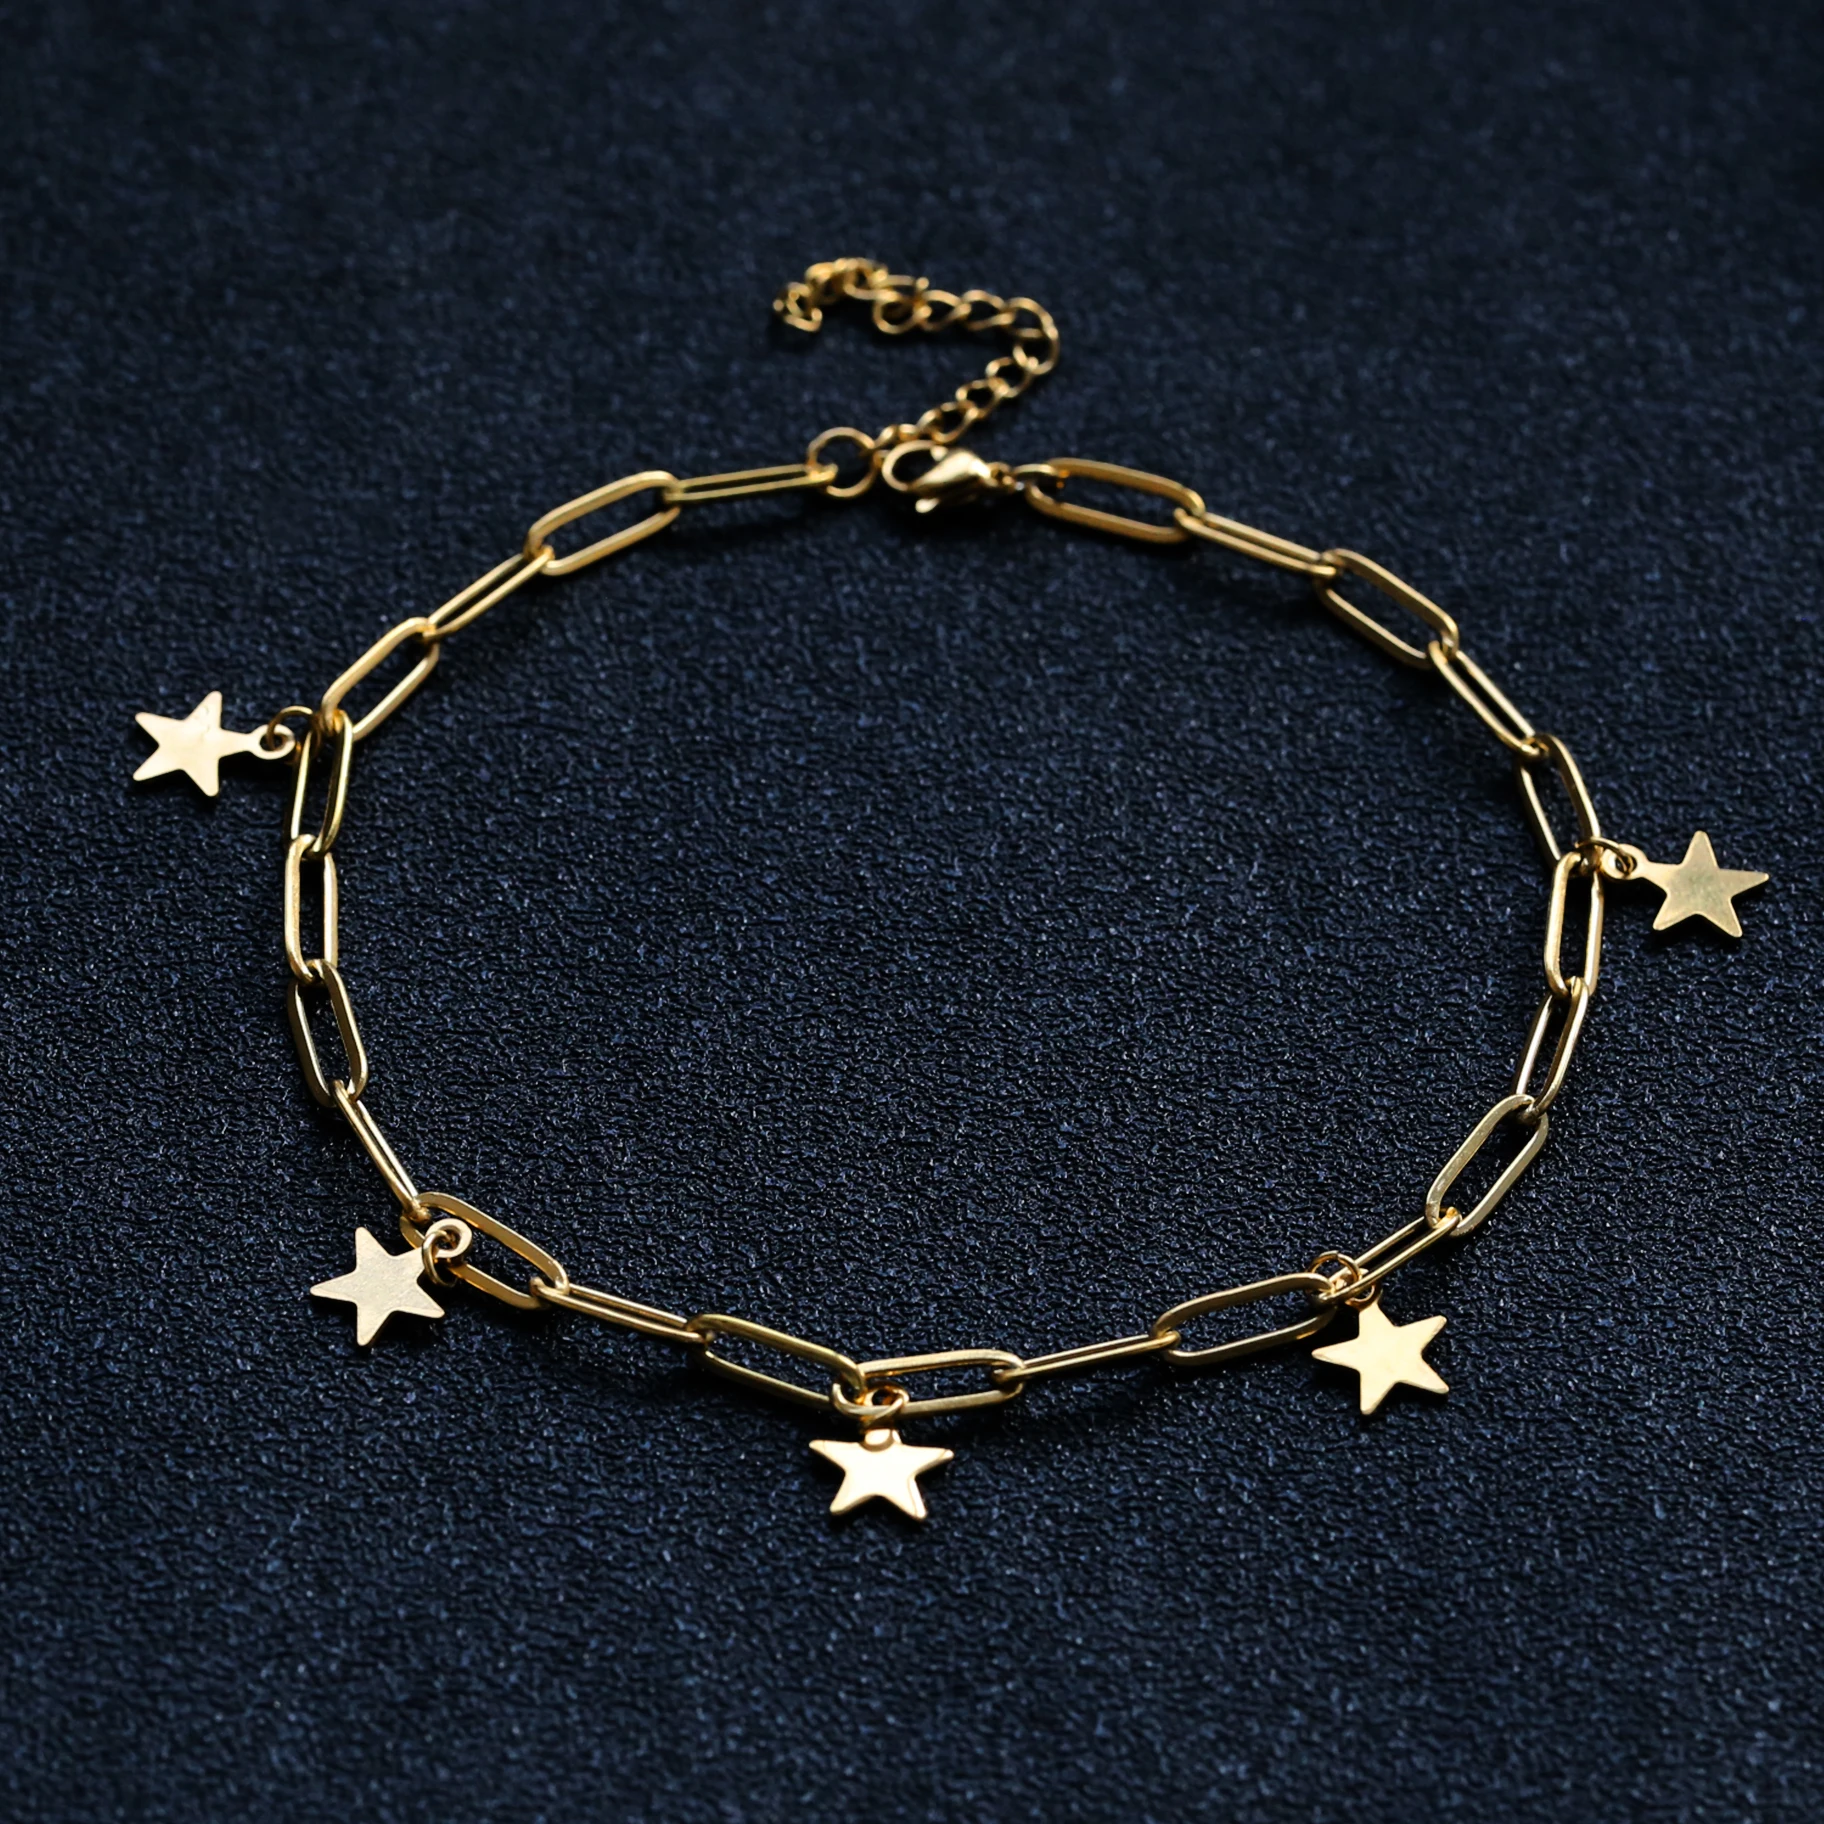 

Elegant Anklets Bohemian Foot Jewelry Women Stainless Steel 14K 18K Gold Plated Ladies Star Charm Anklet, Gold sliver